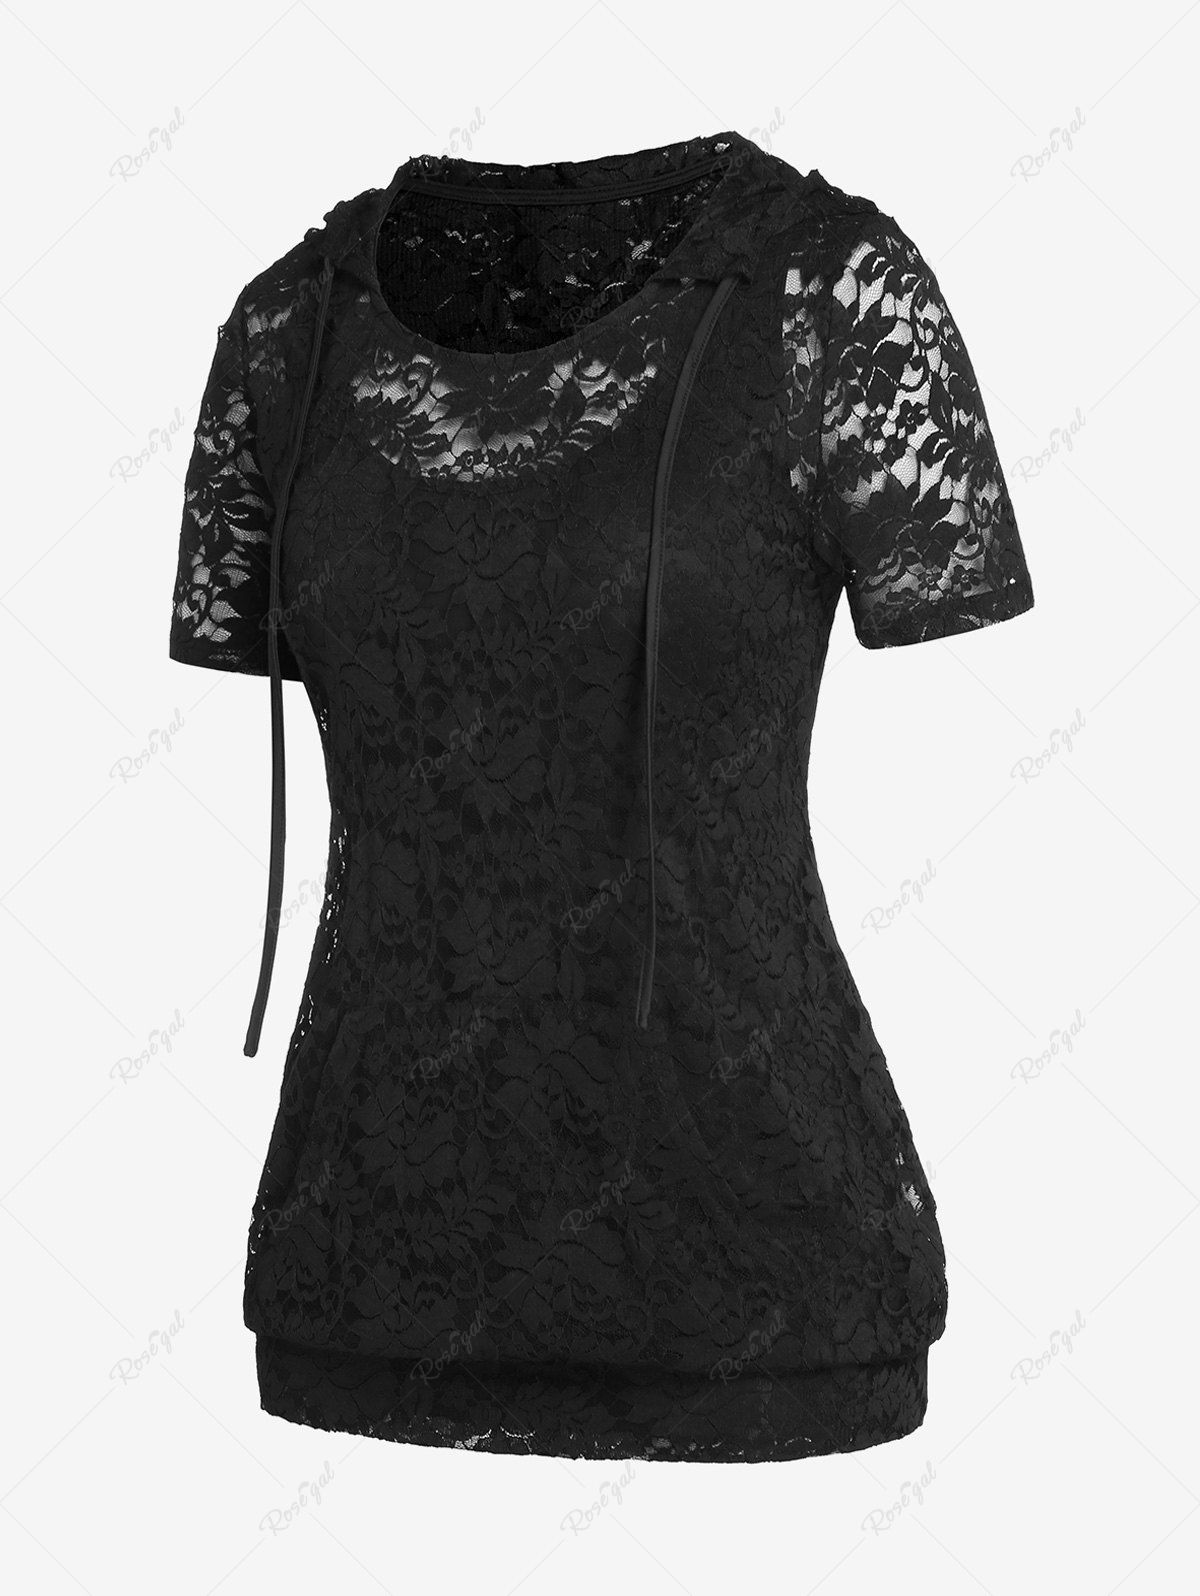 Outfit Plus Size & Curve Hooded Sheer Lace T Shirt and Tank Top Set  